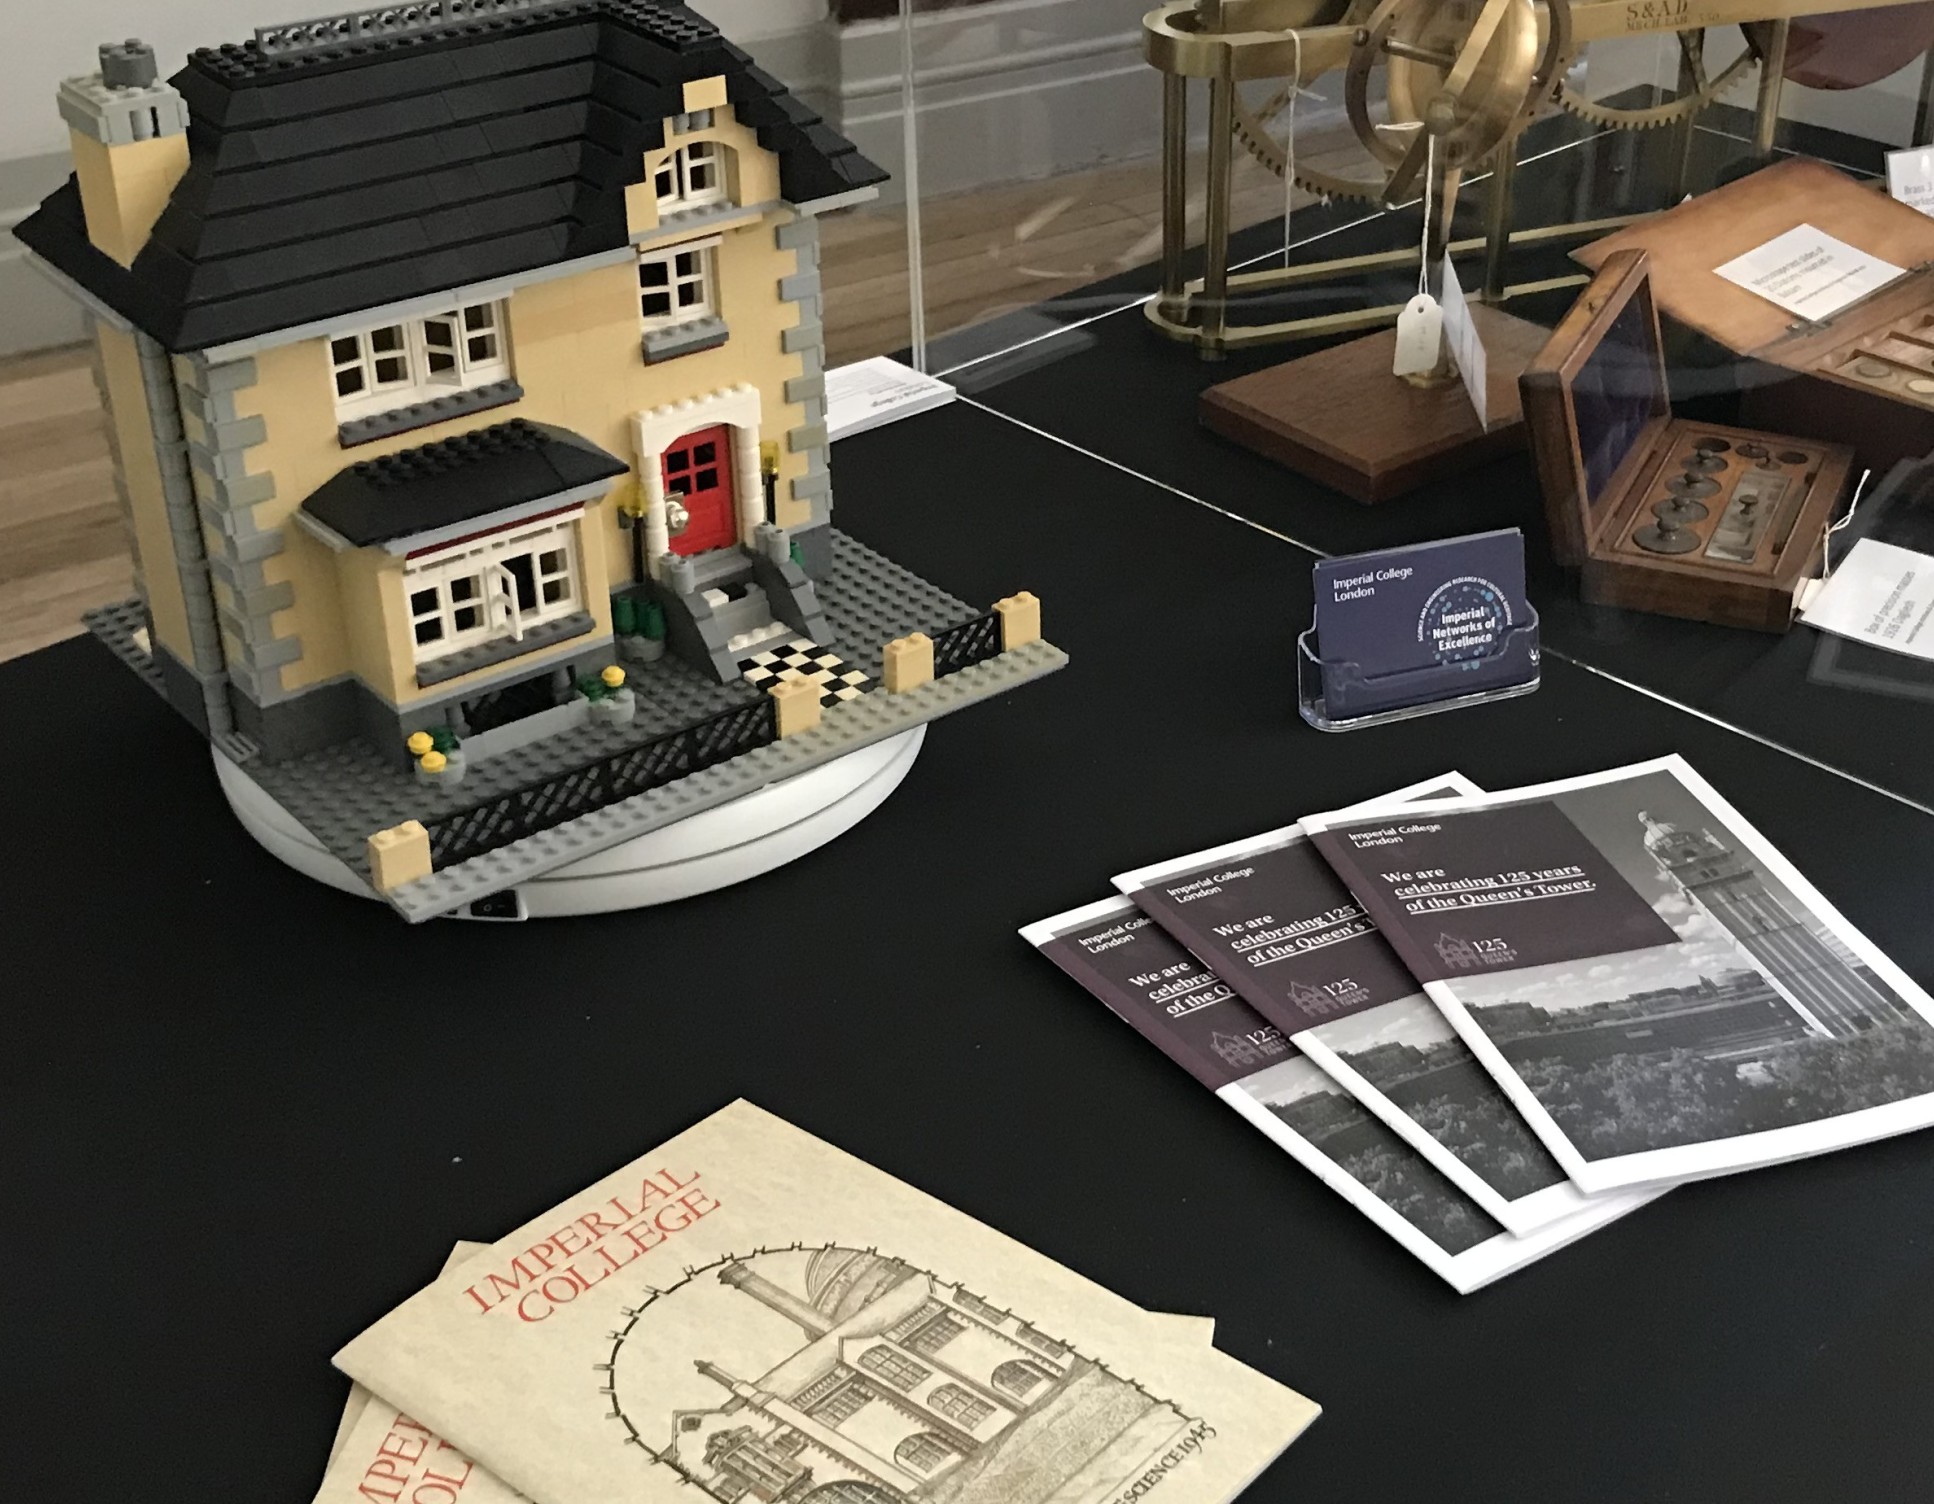 Materials degraded with age: Lego, historical paper pamphlets and scientific instruments